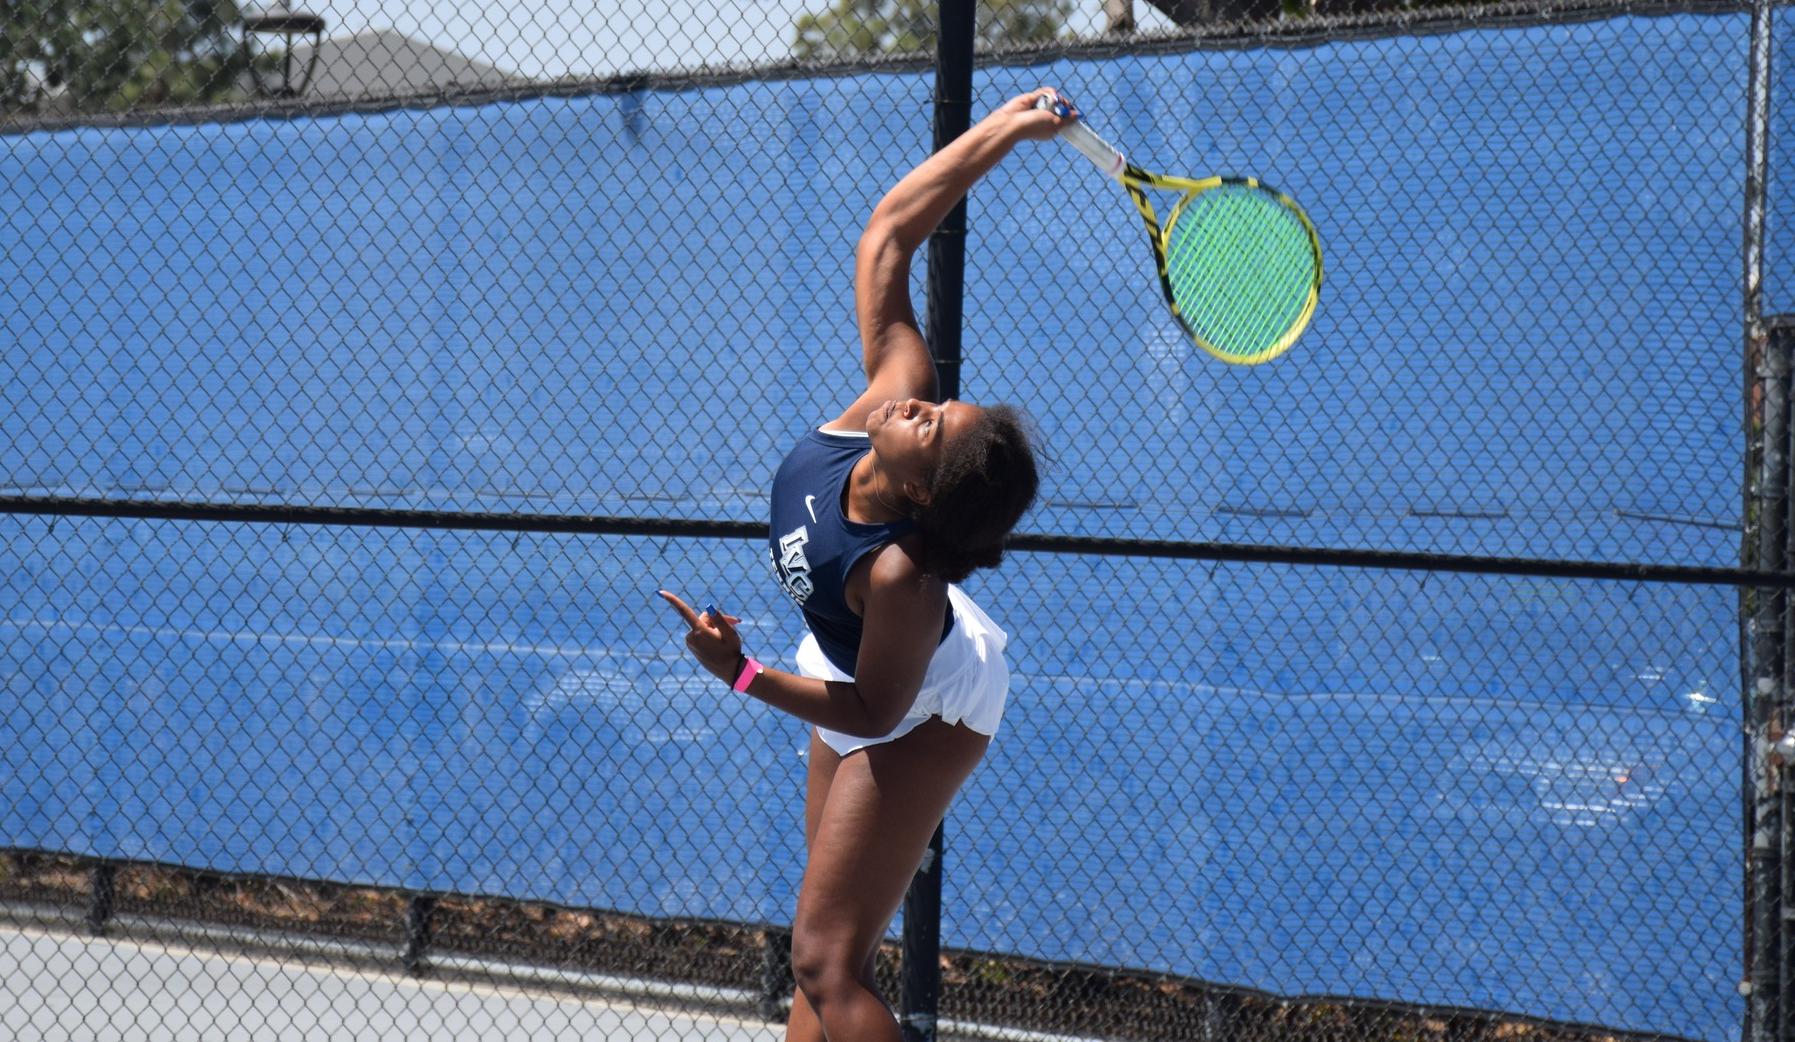 Women's tennis team downs Saddleback for second win in a row